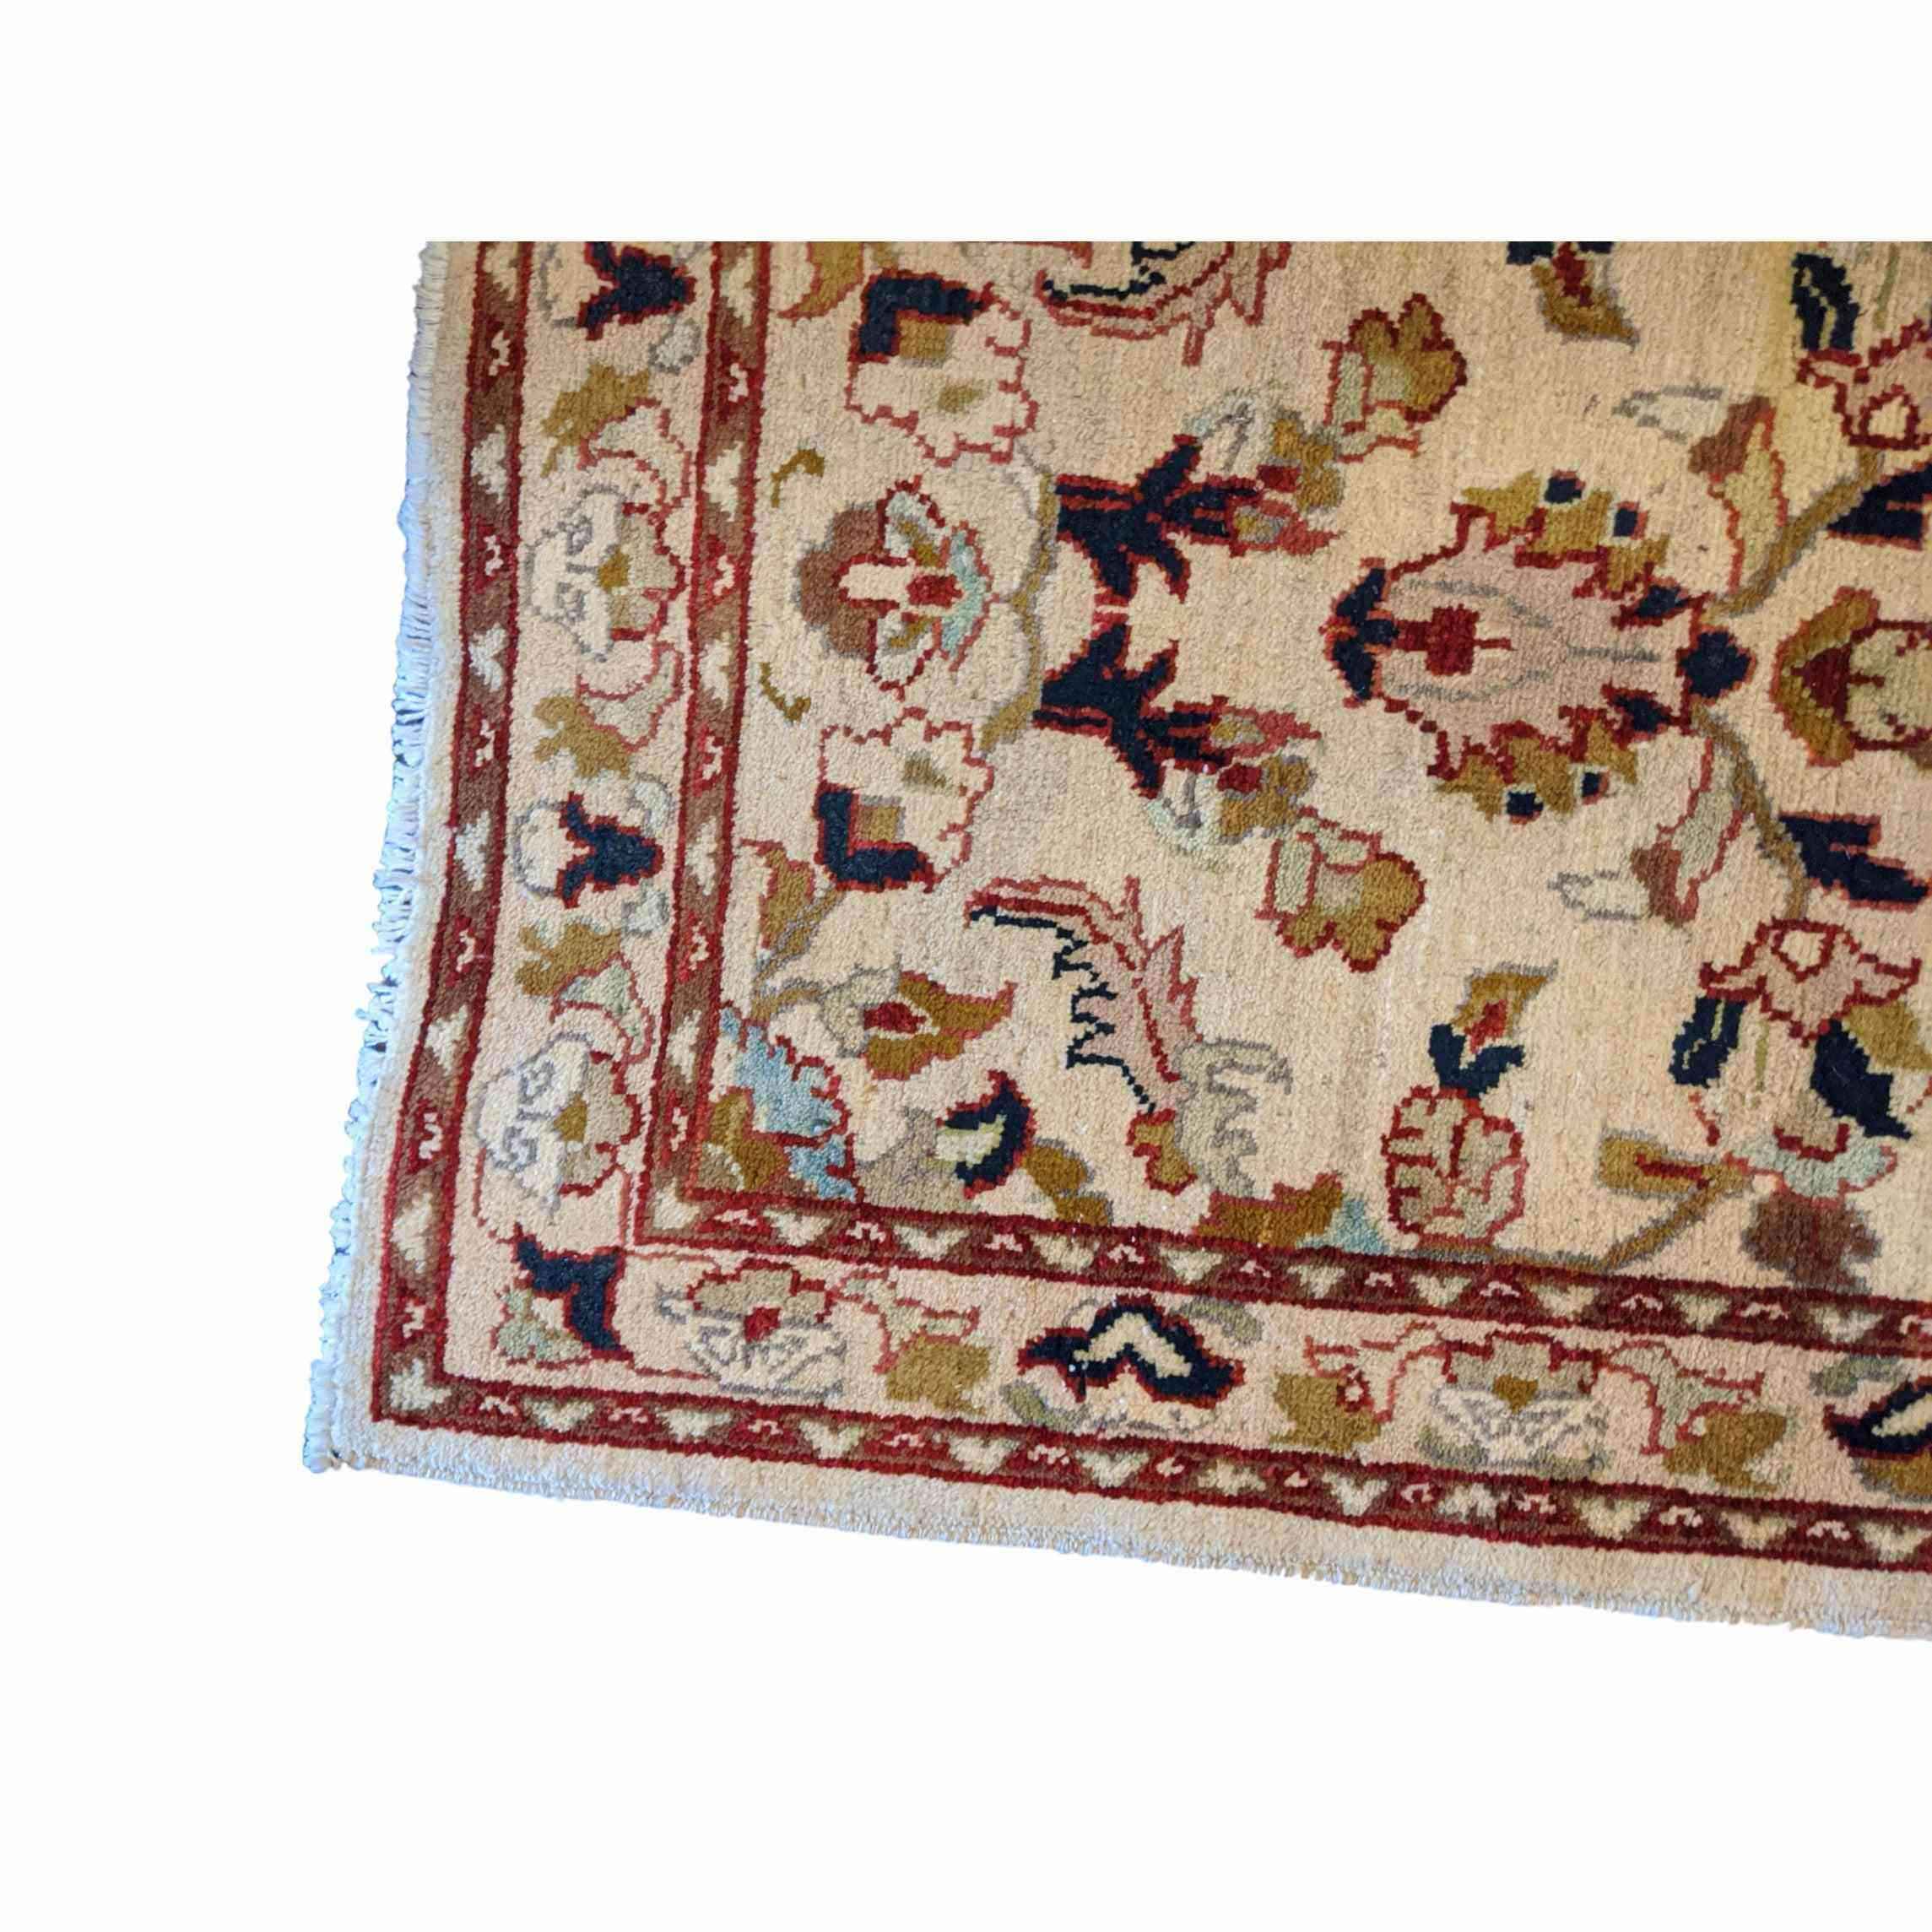 130 x 76 cm Ziegler Brown Floral Antique Brown Small Rug - Rugmaster